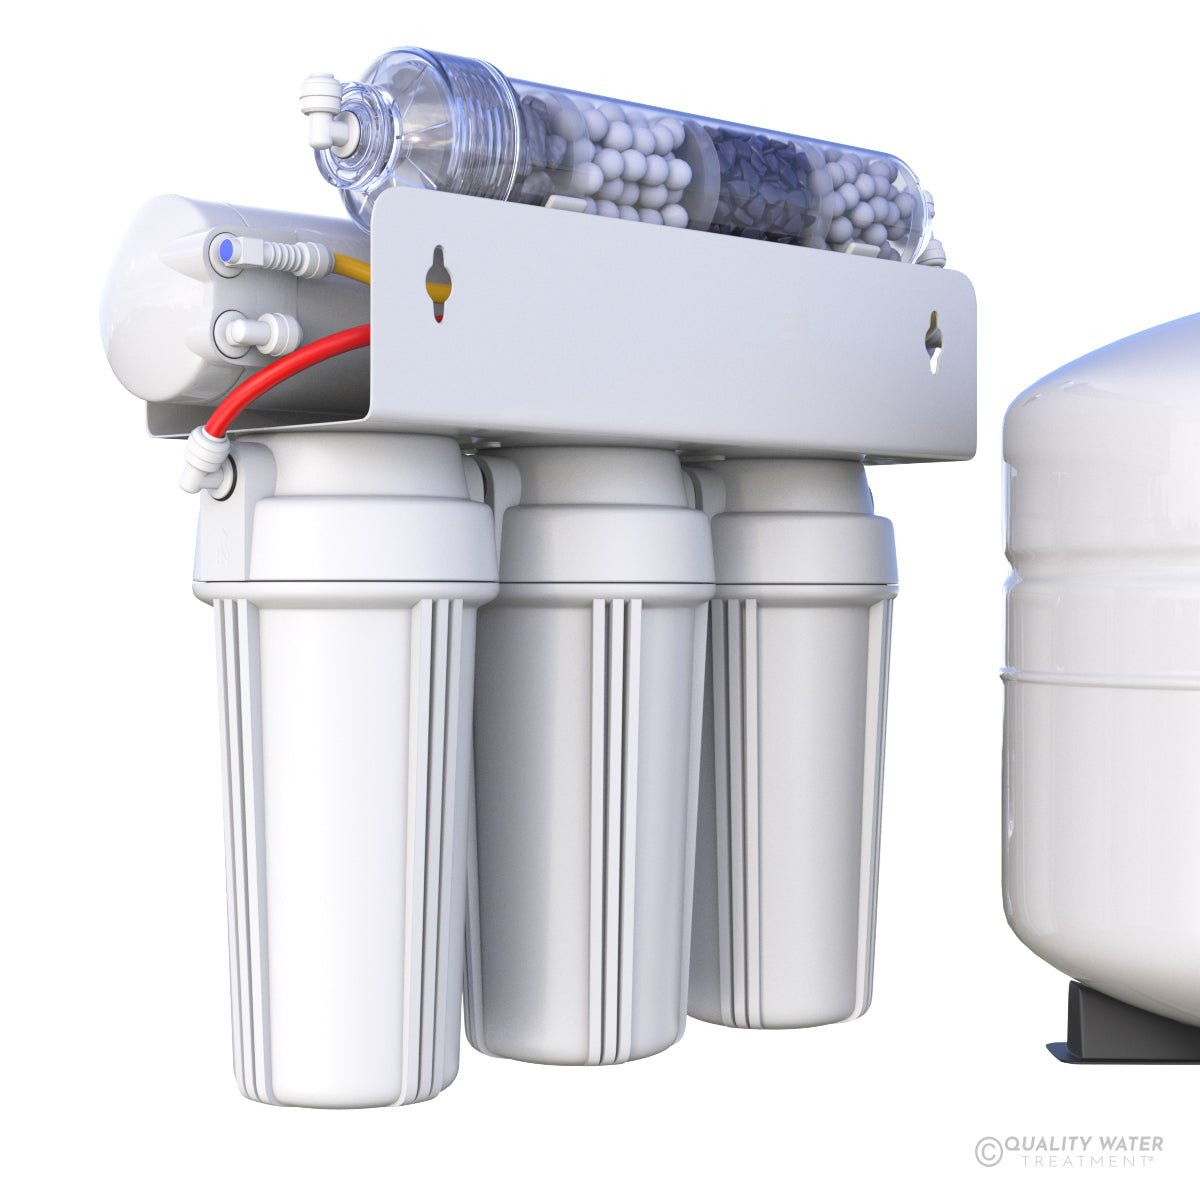 SoftPro® Reverse Osmosis System w/ Advanced Alkalizing RO Water Filter